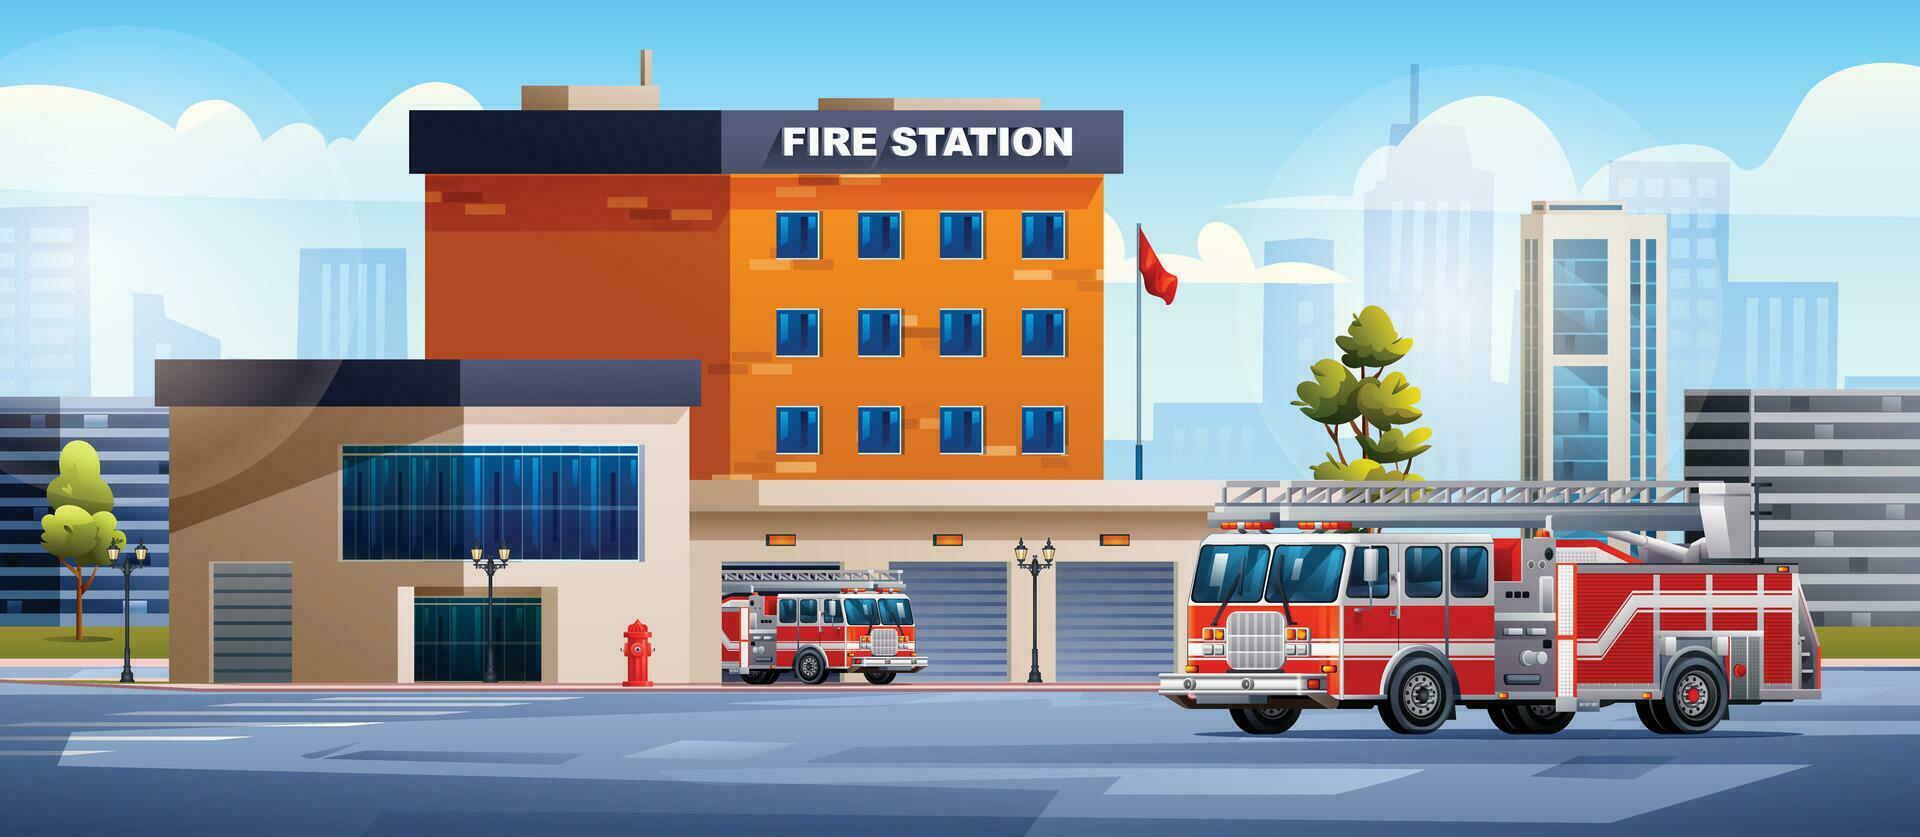 Fire station building with fire trucks on cityscape background. Fire department. City landscape vector cartoon illustration